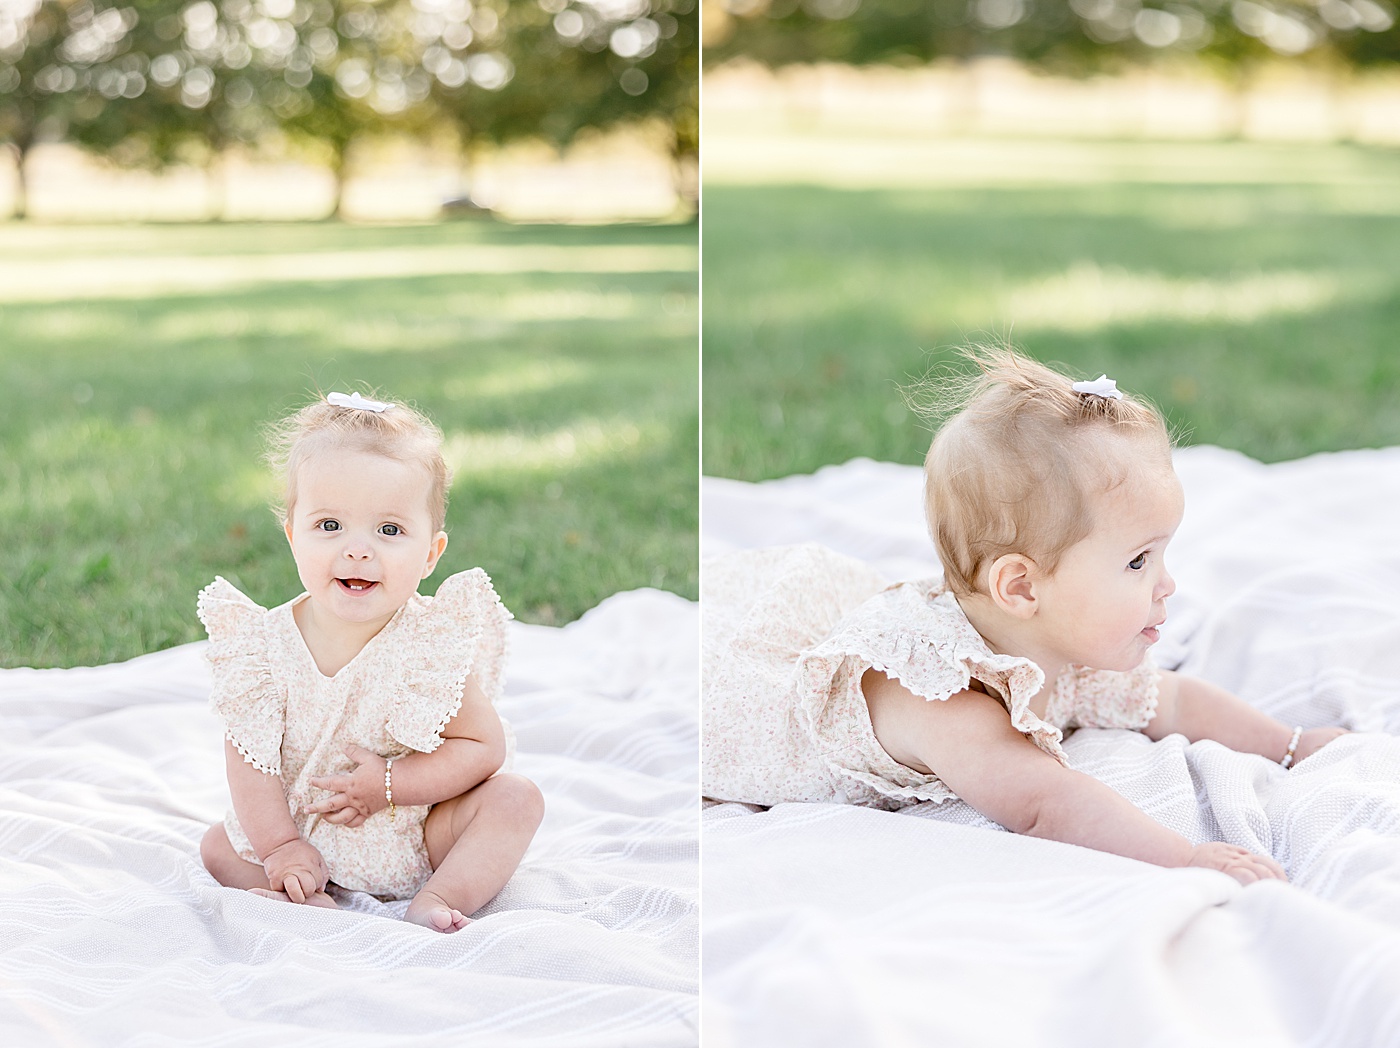 7 month old baby girl sitting on blanket in park at Sherwood Island for photoshoot with Kristin Wood Photography.